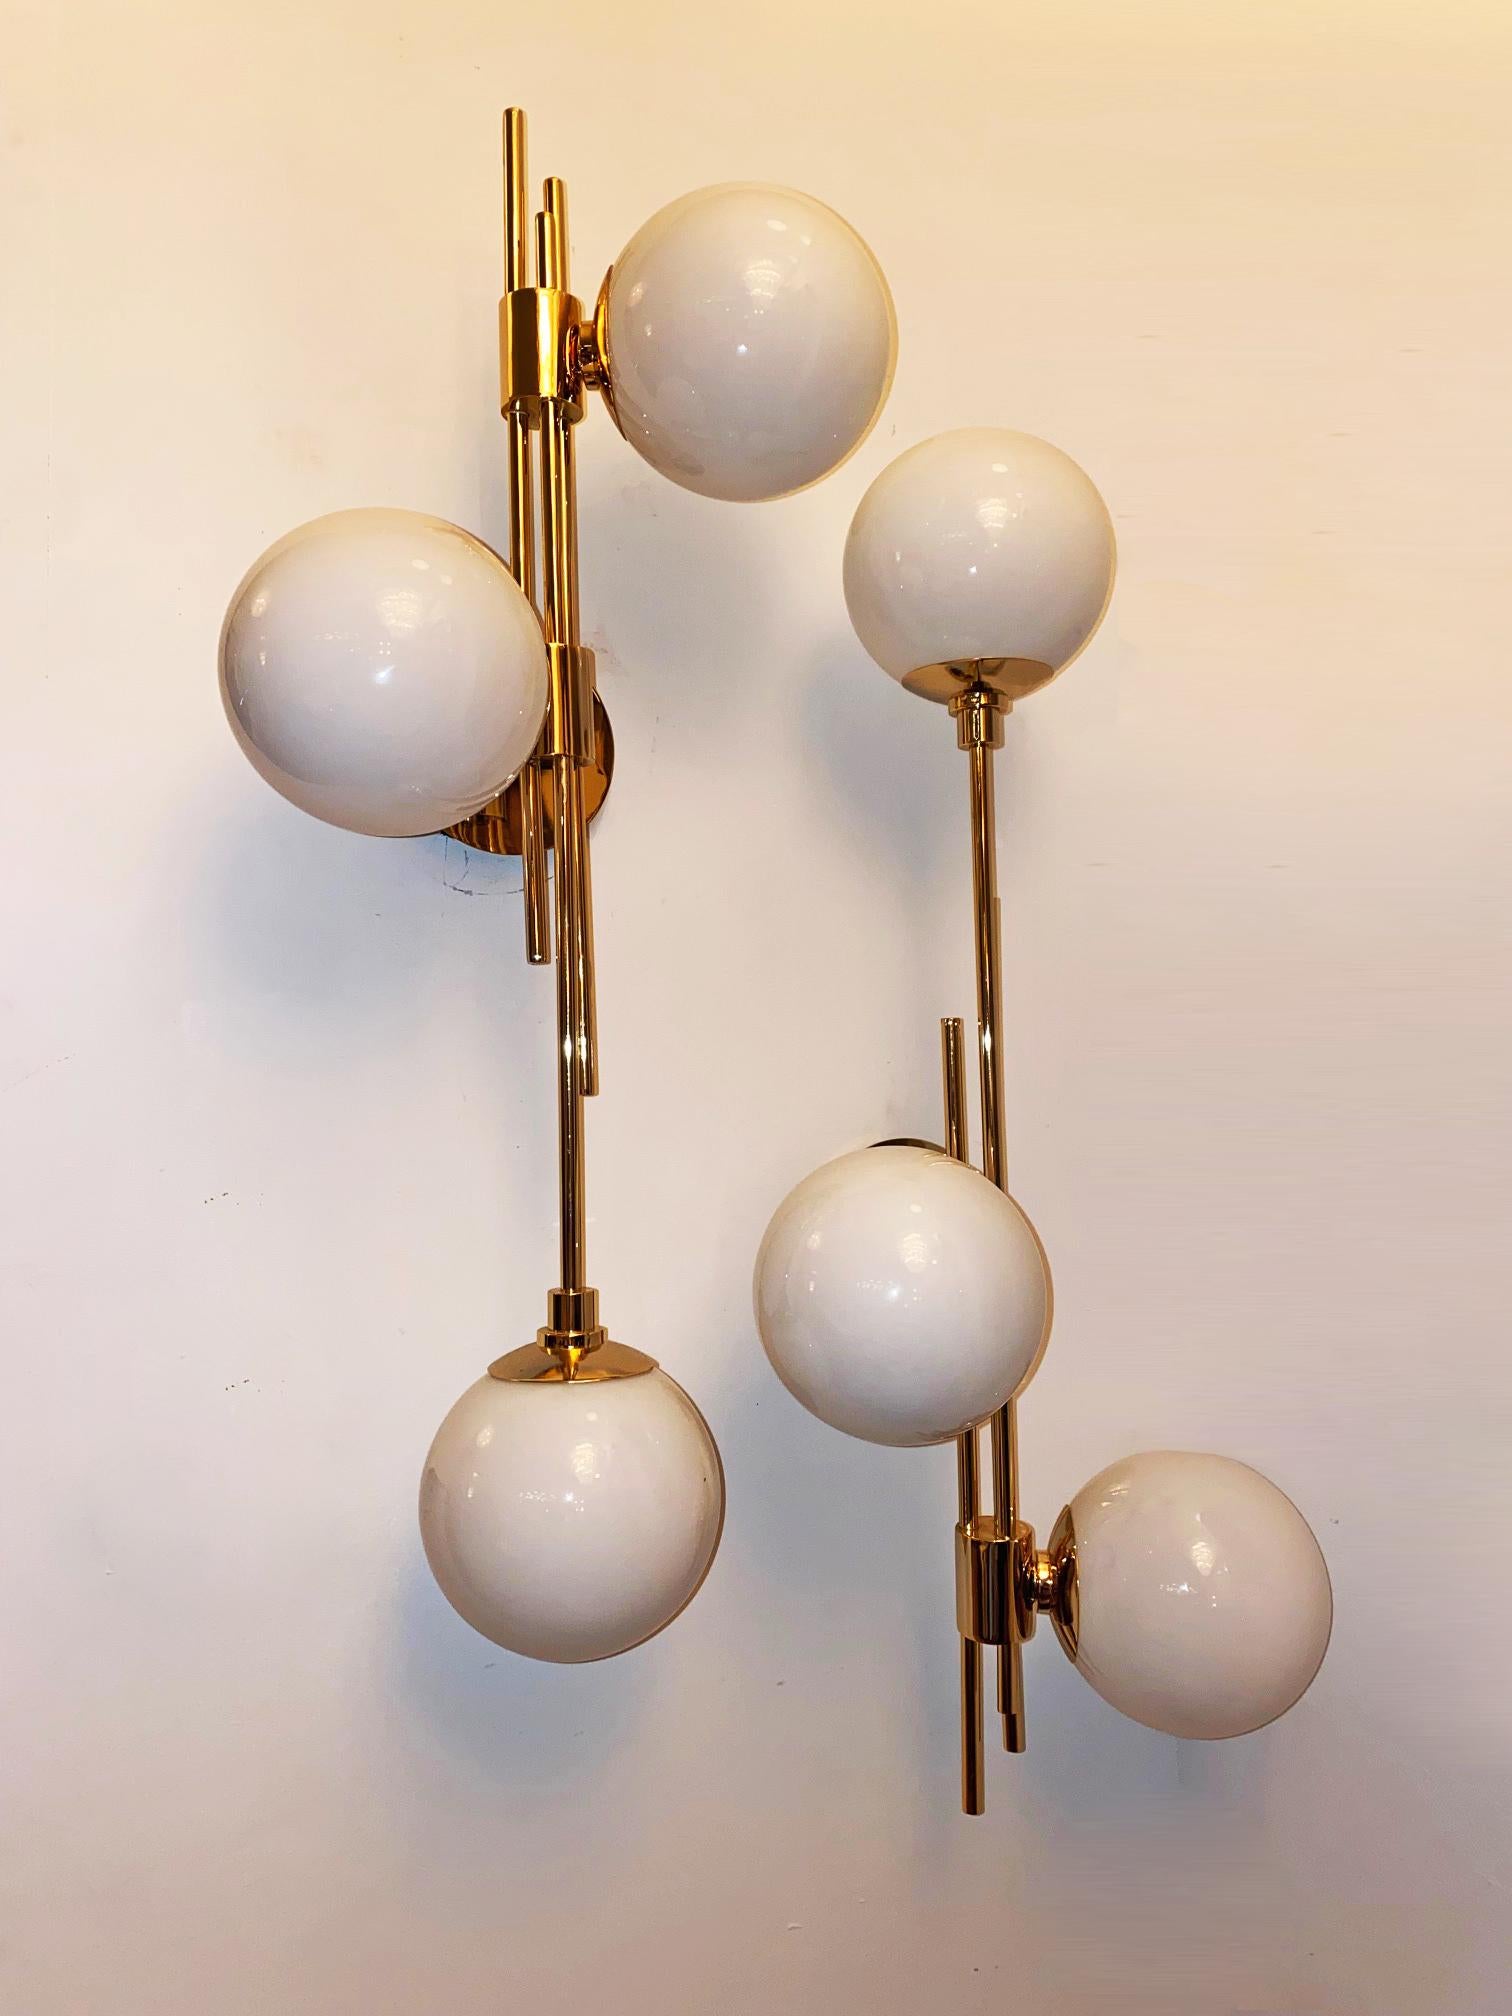 Group of 4 brass plated and hand blown Italian glass balls wall sconces.
Versatile hanging. 3 G9 sockets.
Price is for all 4 sconces